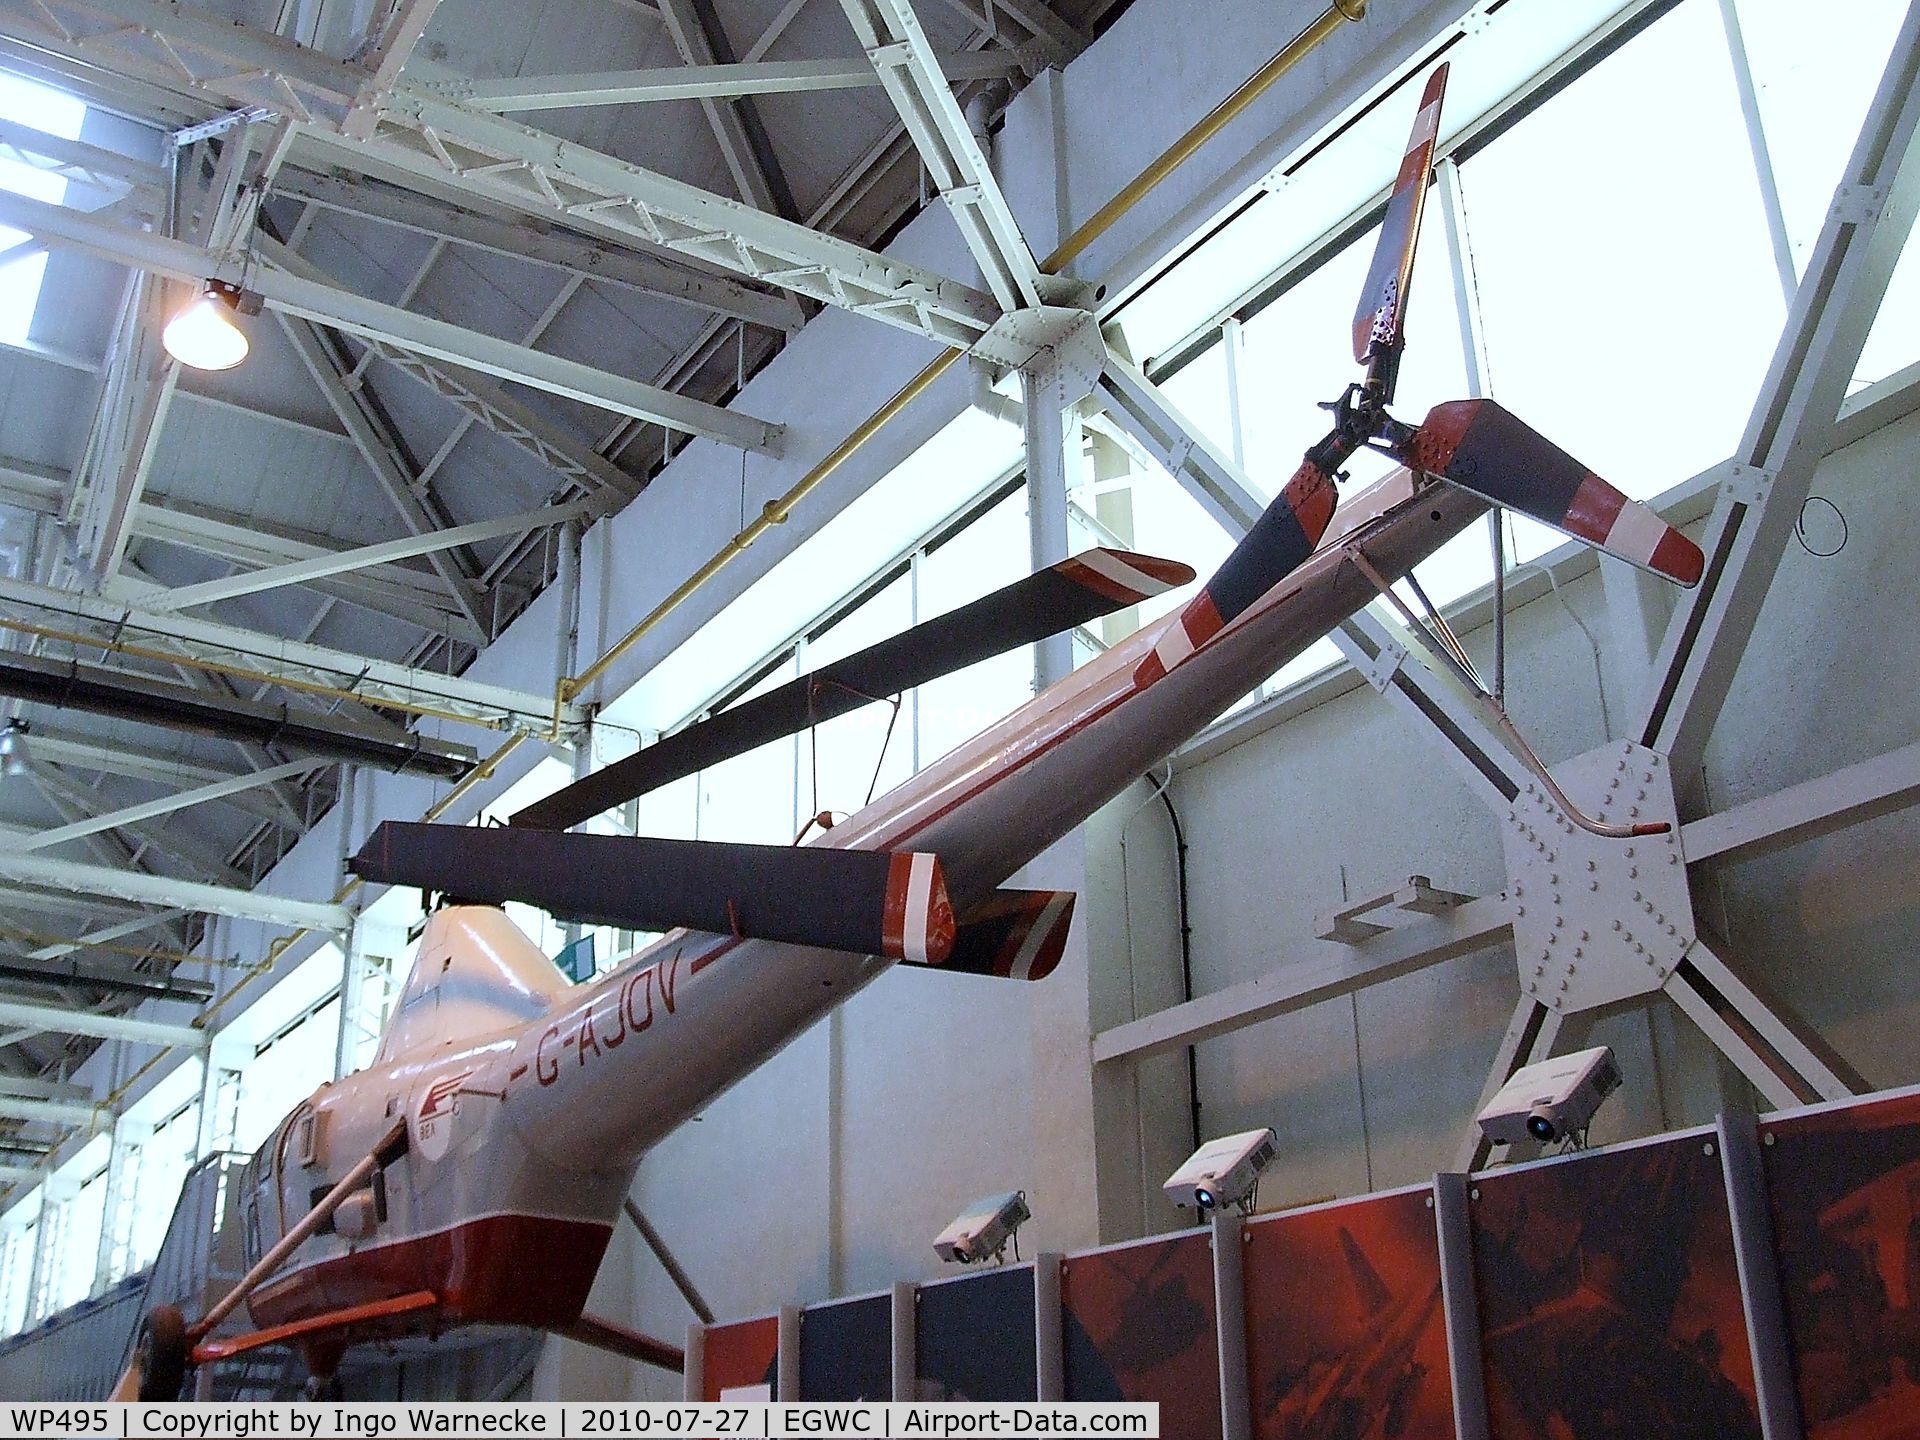 WP495, Westland Dragonfly HR.3 C/N WA/H/80, Sikorsky S-51 at the RAF Museum, Cosford